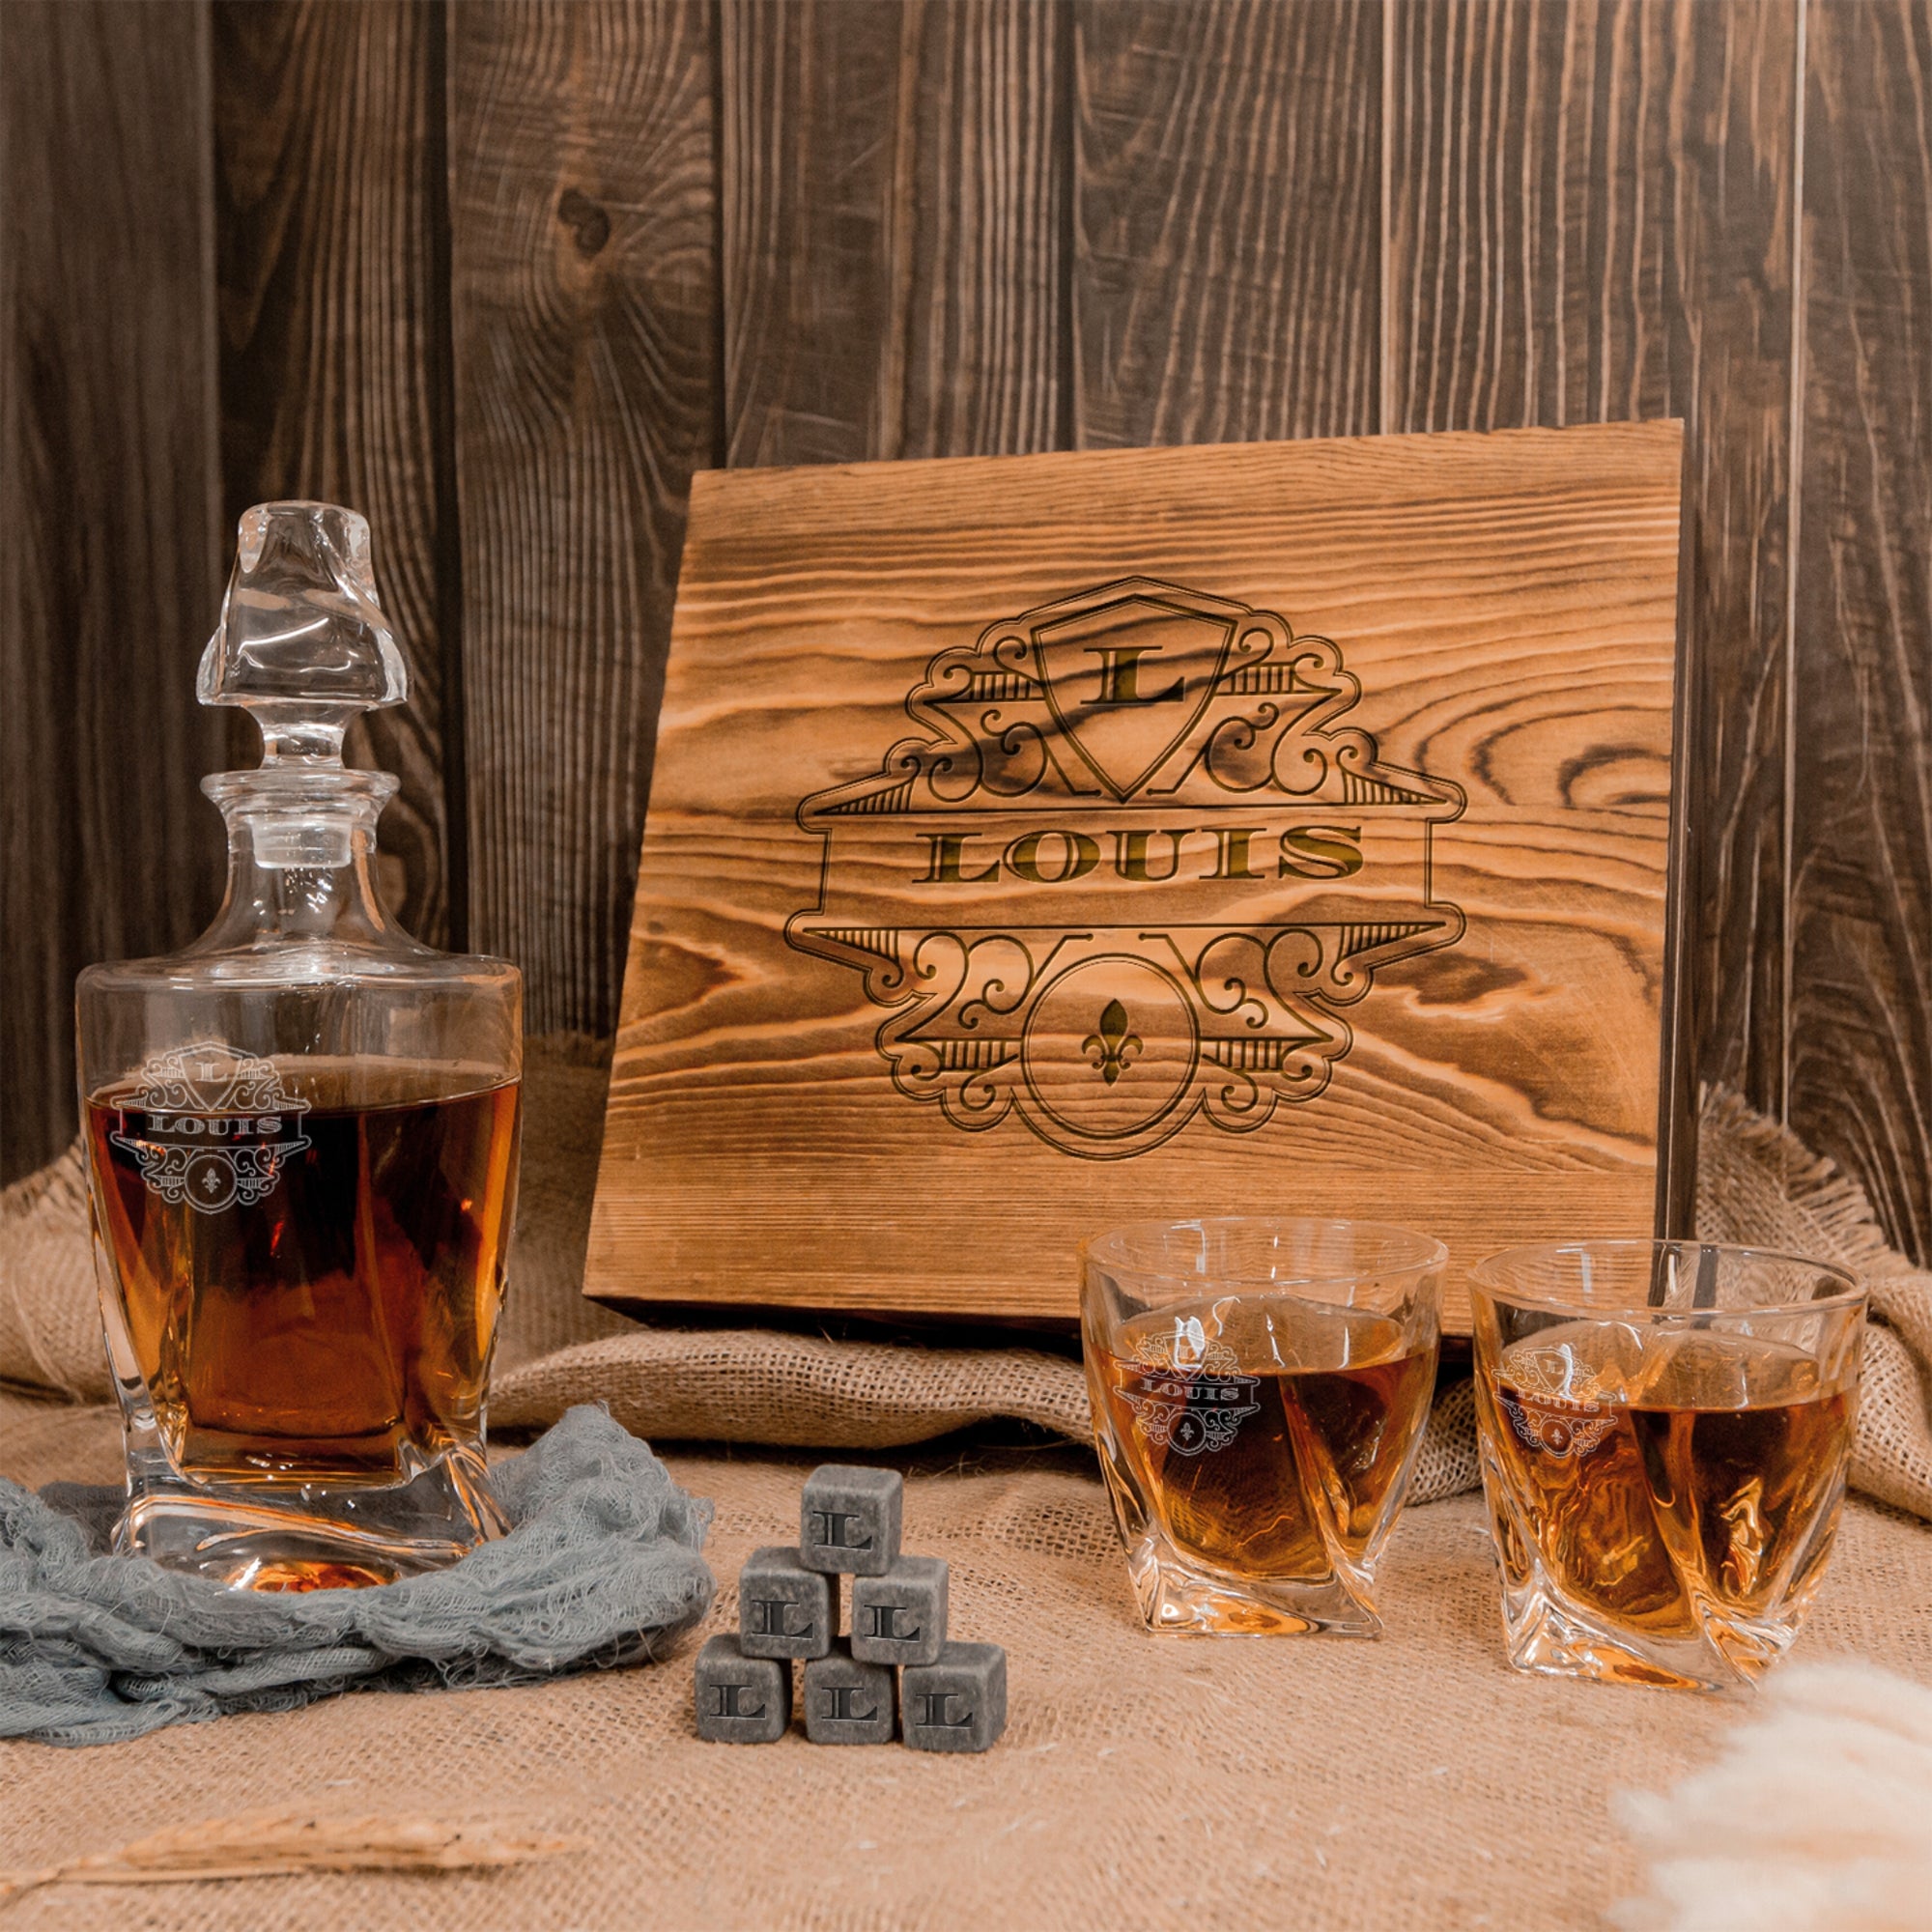 Engraved Whiskey Wooden Box - Twisted Decanter, 2 Scotch Glasses & 6 Ice Stones Personalised Barware Set, Groomsman, Father's Day, Xmas Gift